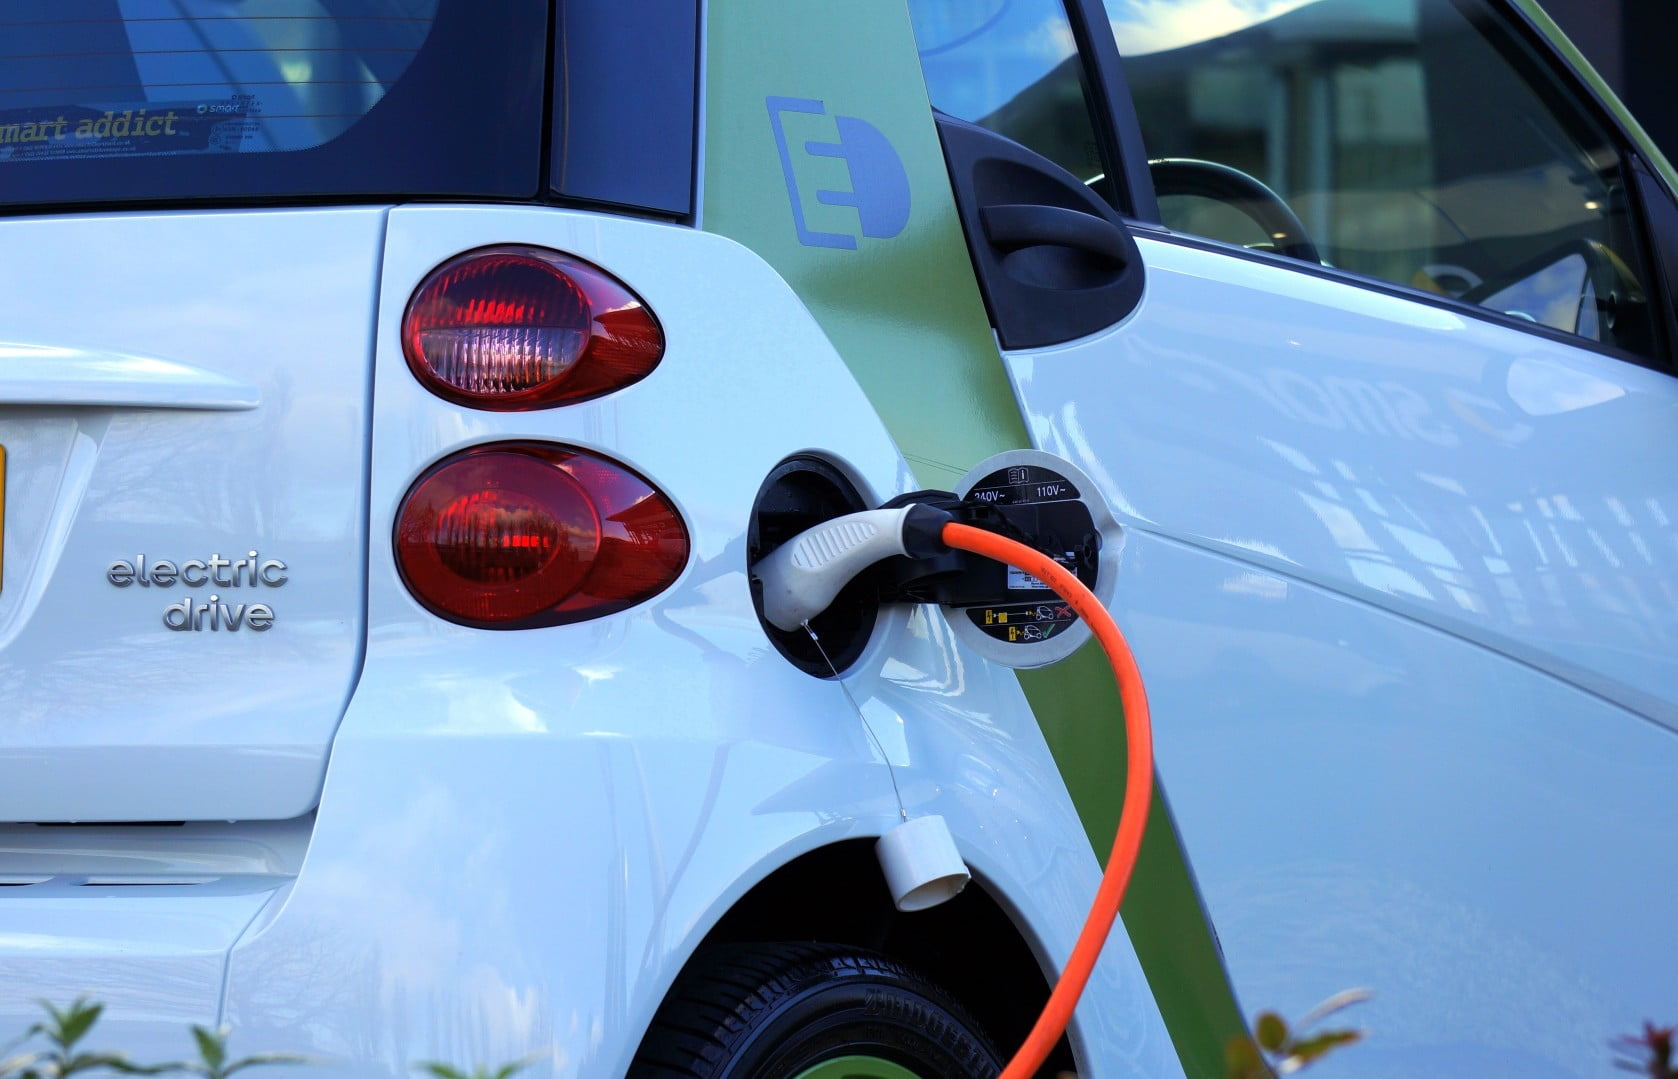 Plug-in grant for vehicles ends to focus on expanding EV charging network